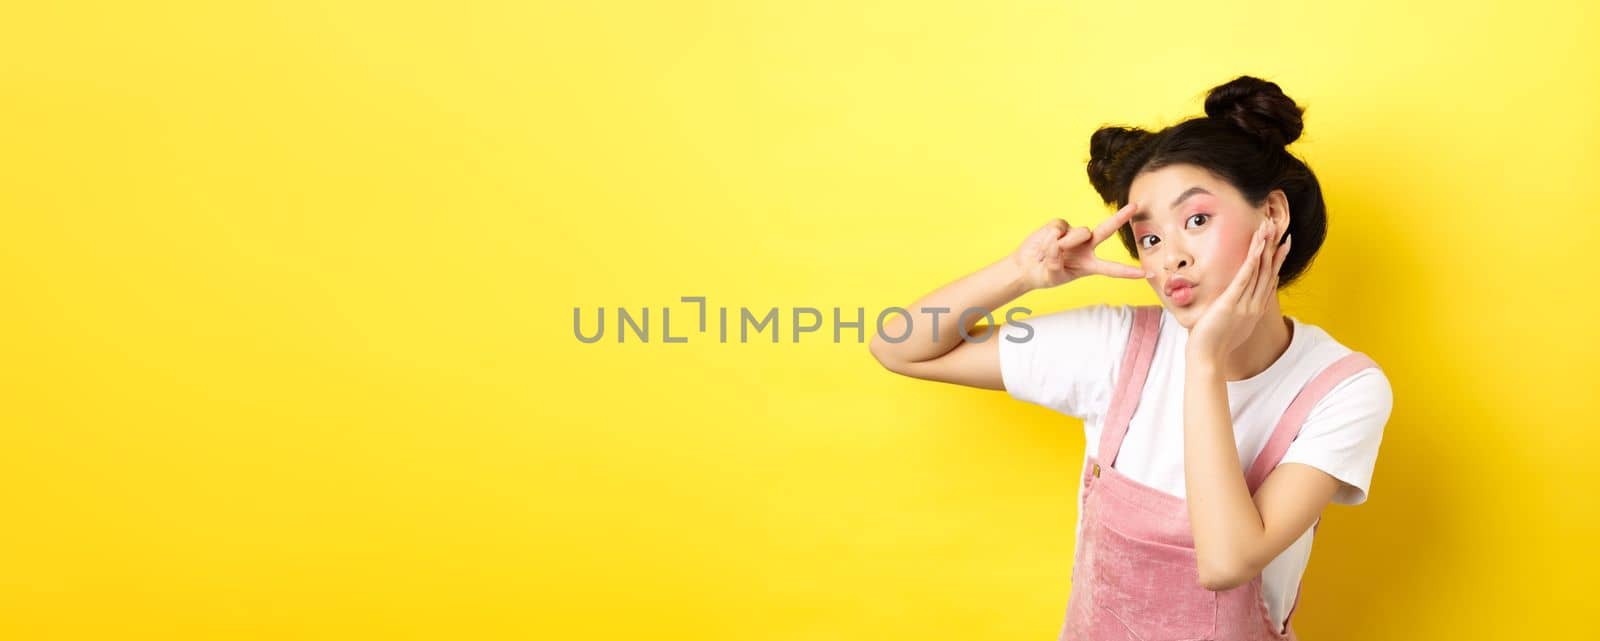 Beautiful asian girl showing v-sign and pouting cute, making silly face with makeup, standing on yellow background.